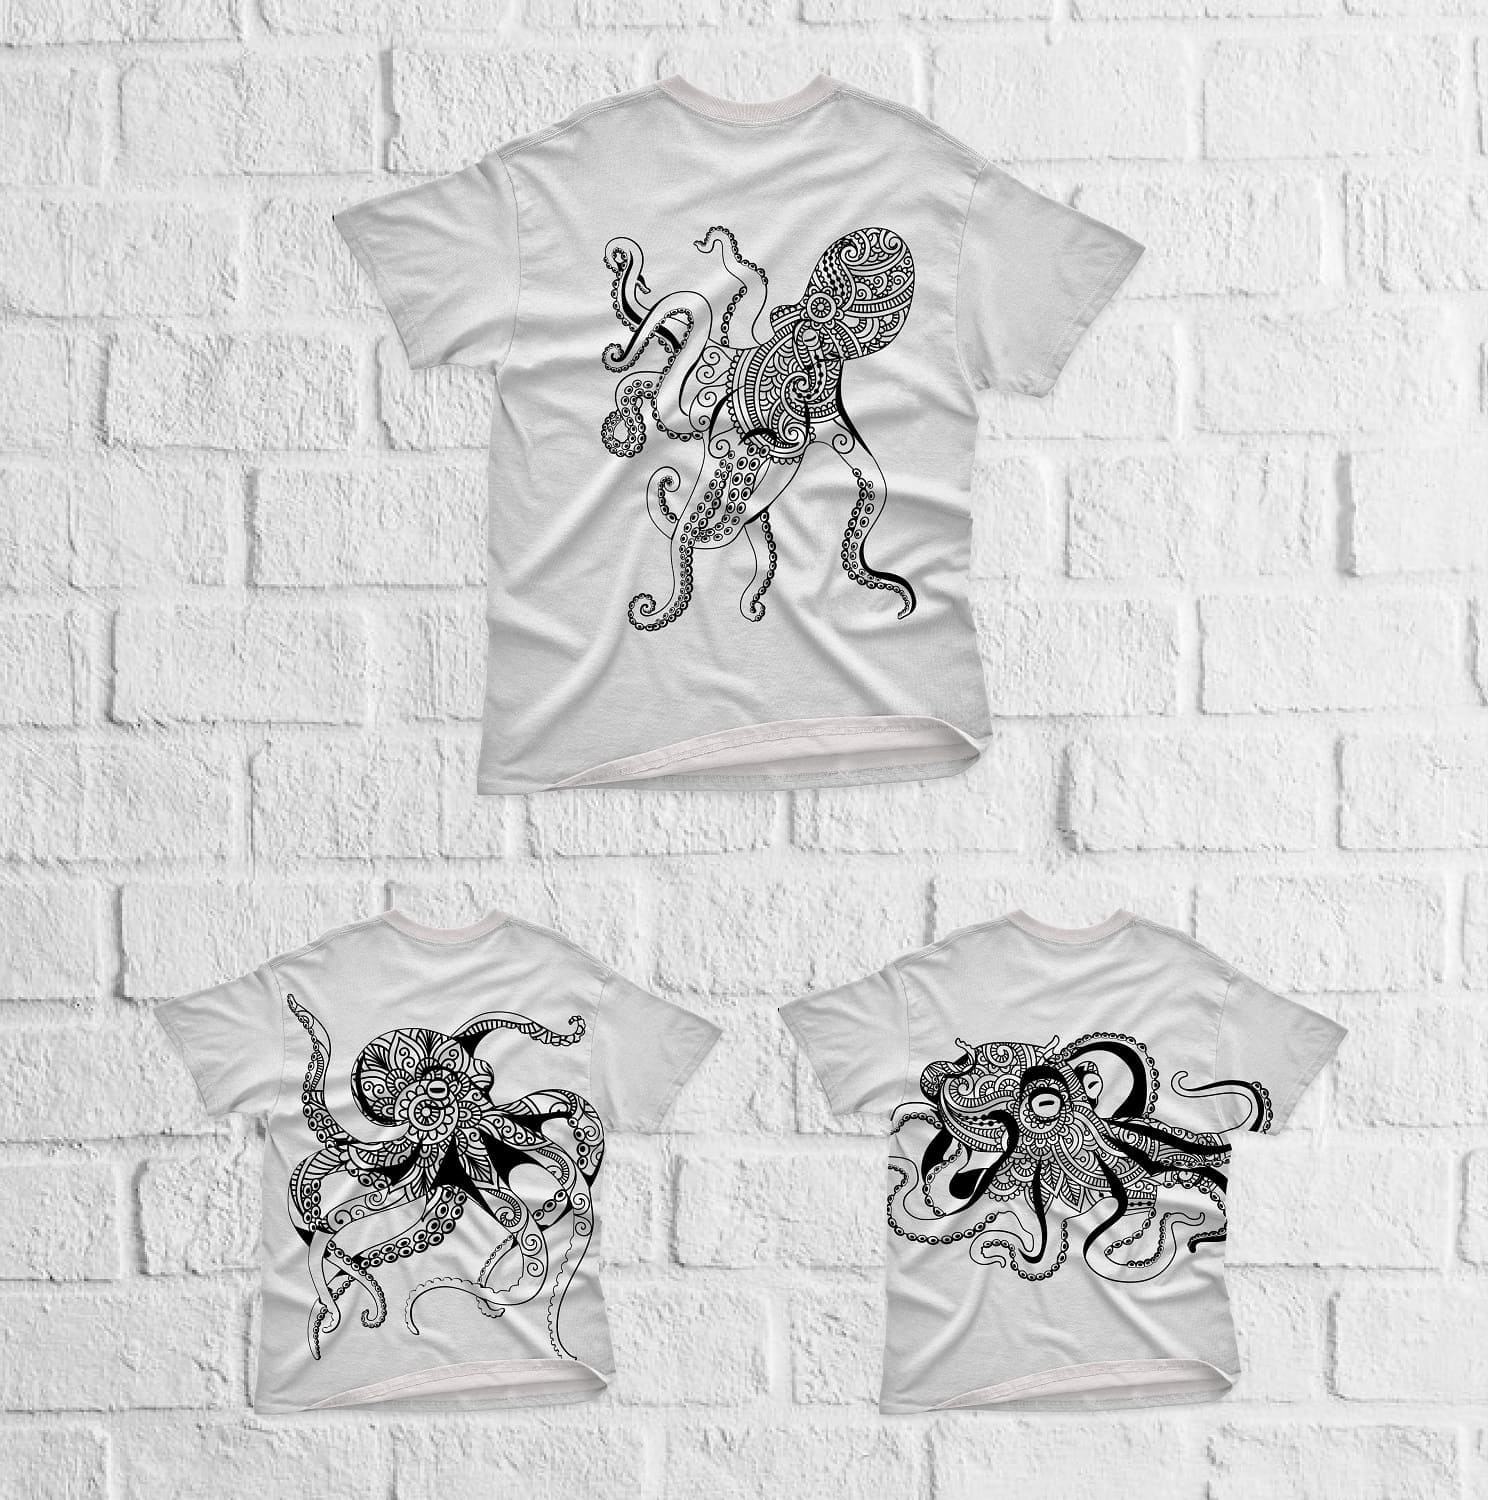 Three white t-shirts with the image of an octopus mandala.